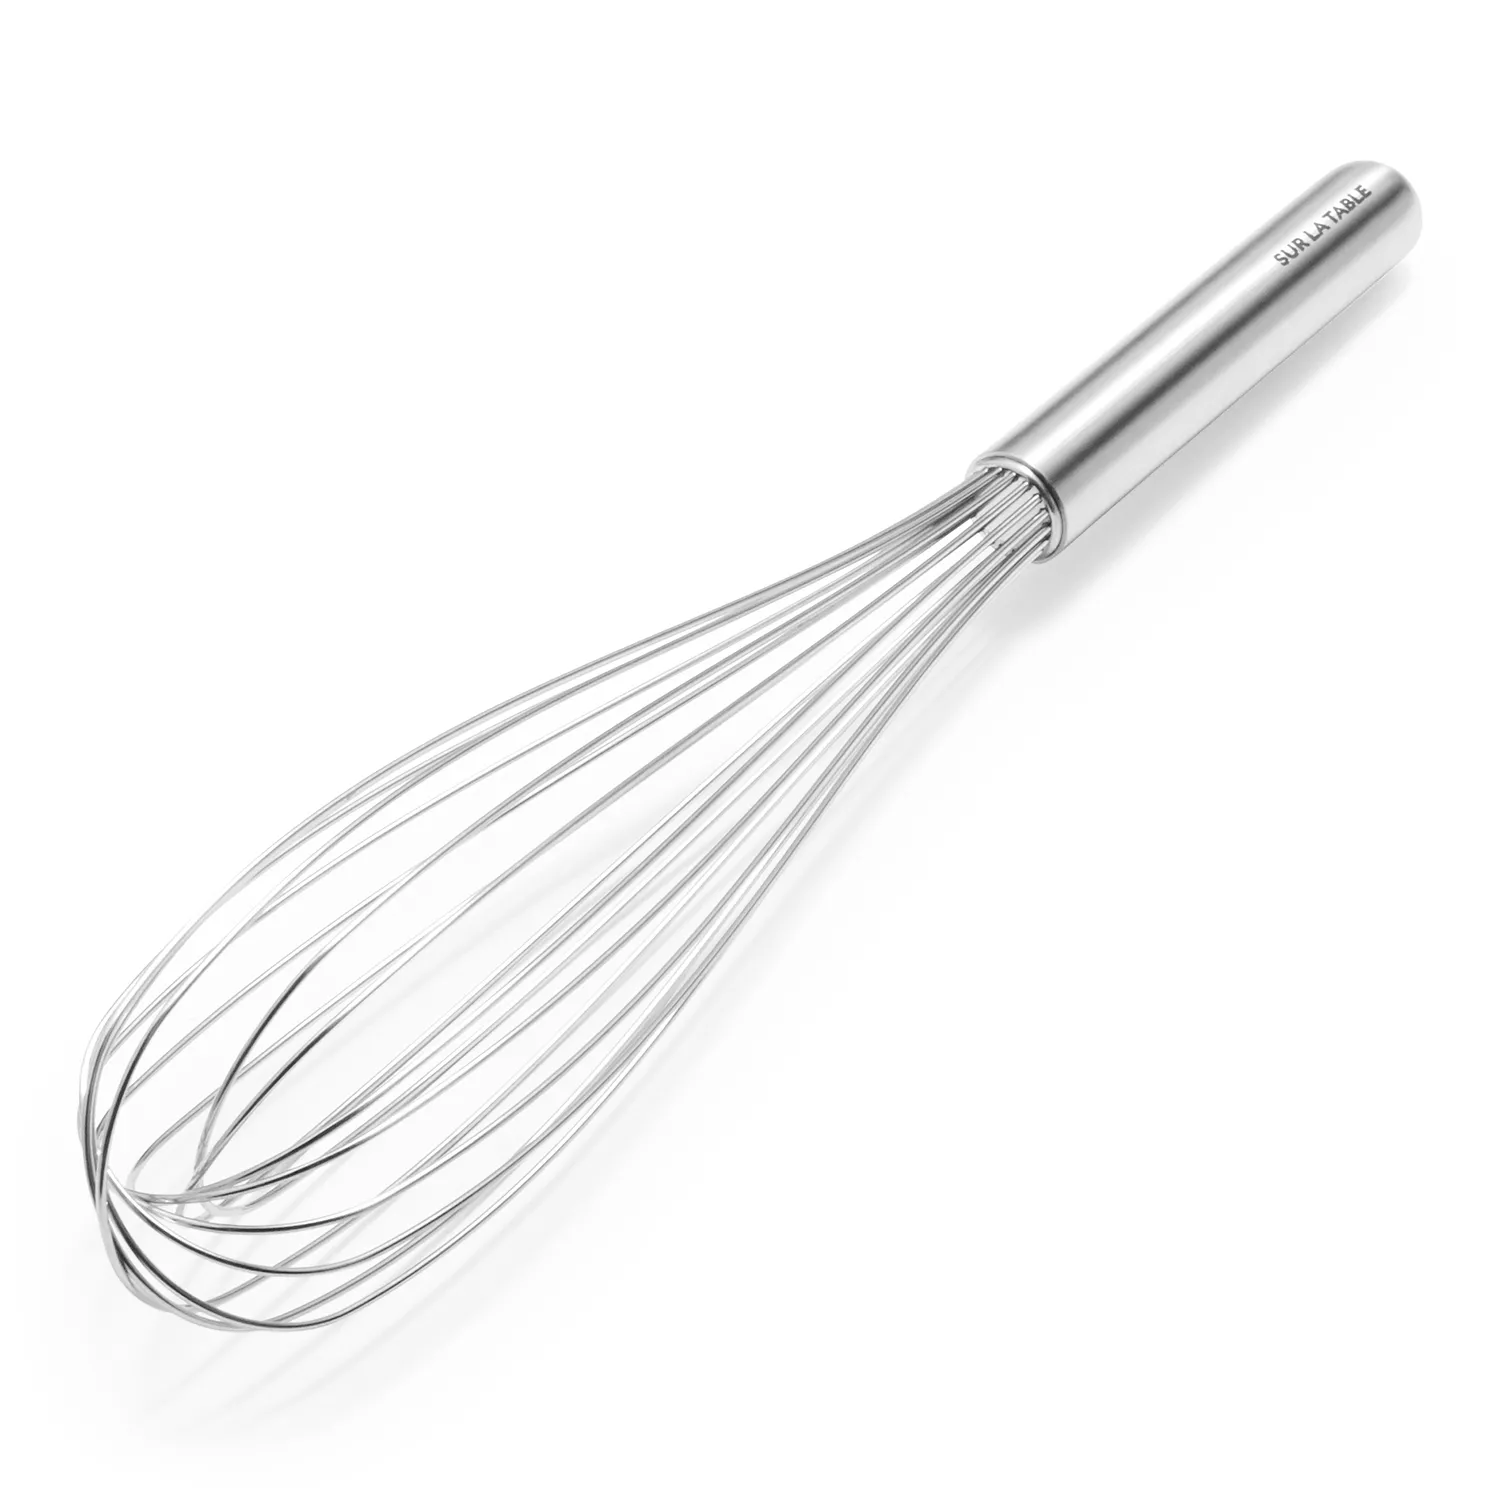 Mini Whisks Stainless Steel, Small Whisk 2 Pieces,whisking, Beating,  Blending Ingredients, Mixing Sauces